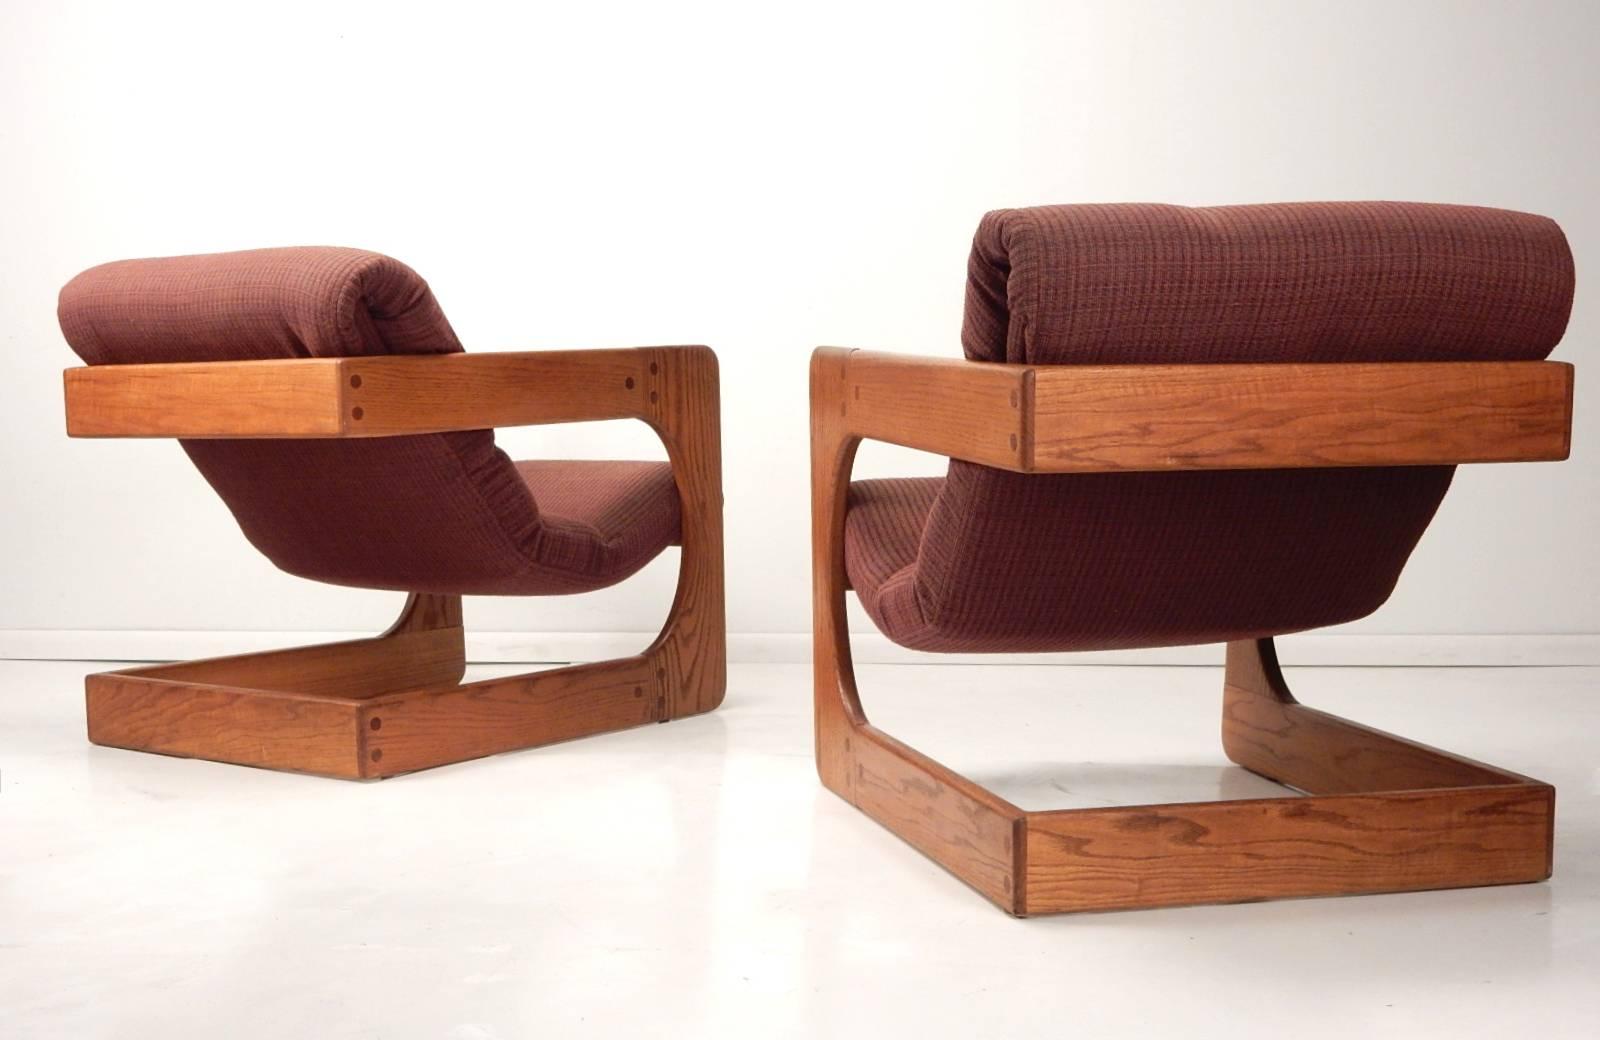 Completely original cantilever lounge chairs designed by Lou Hodges, circa 1970s.
Solid oak construction with sling seating upholstered in a blended weave.
Neutral colors blend well in any decor.
     